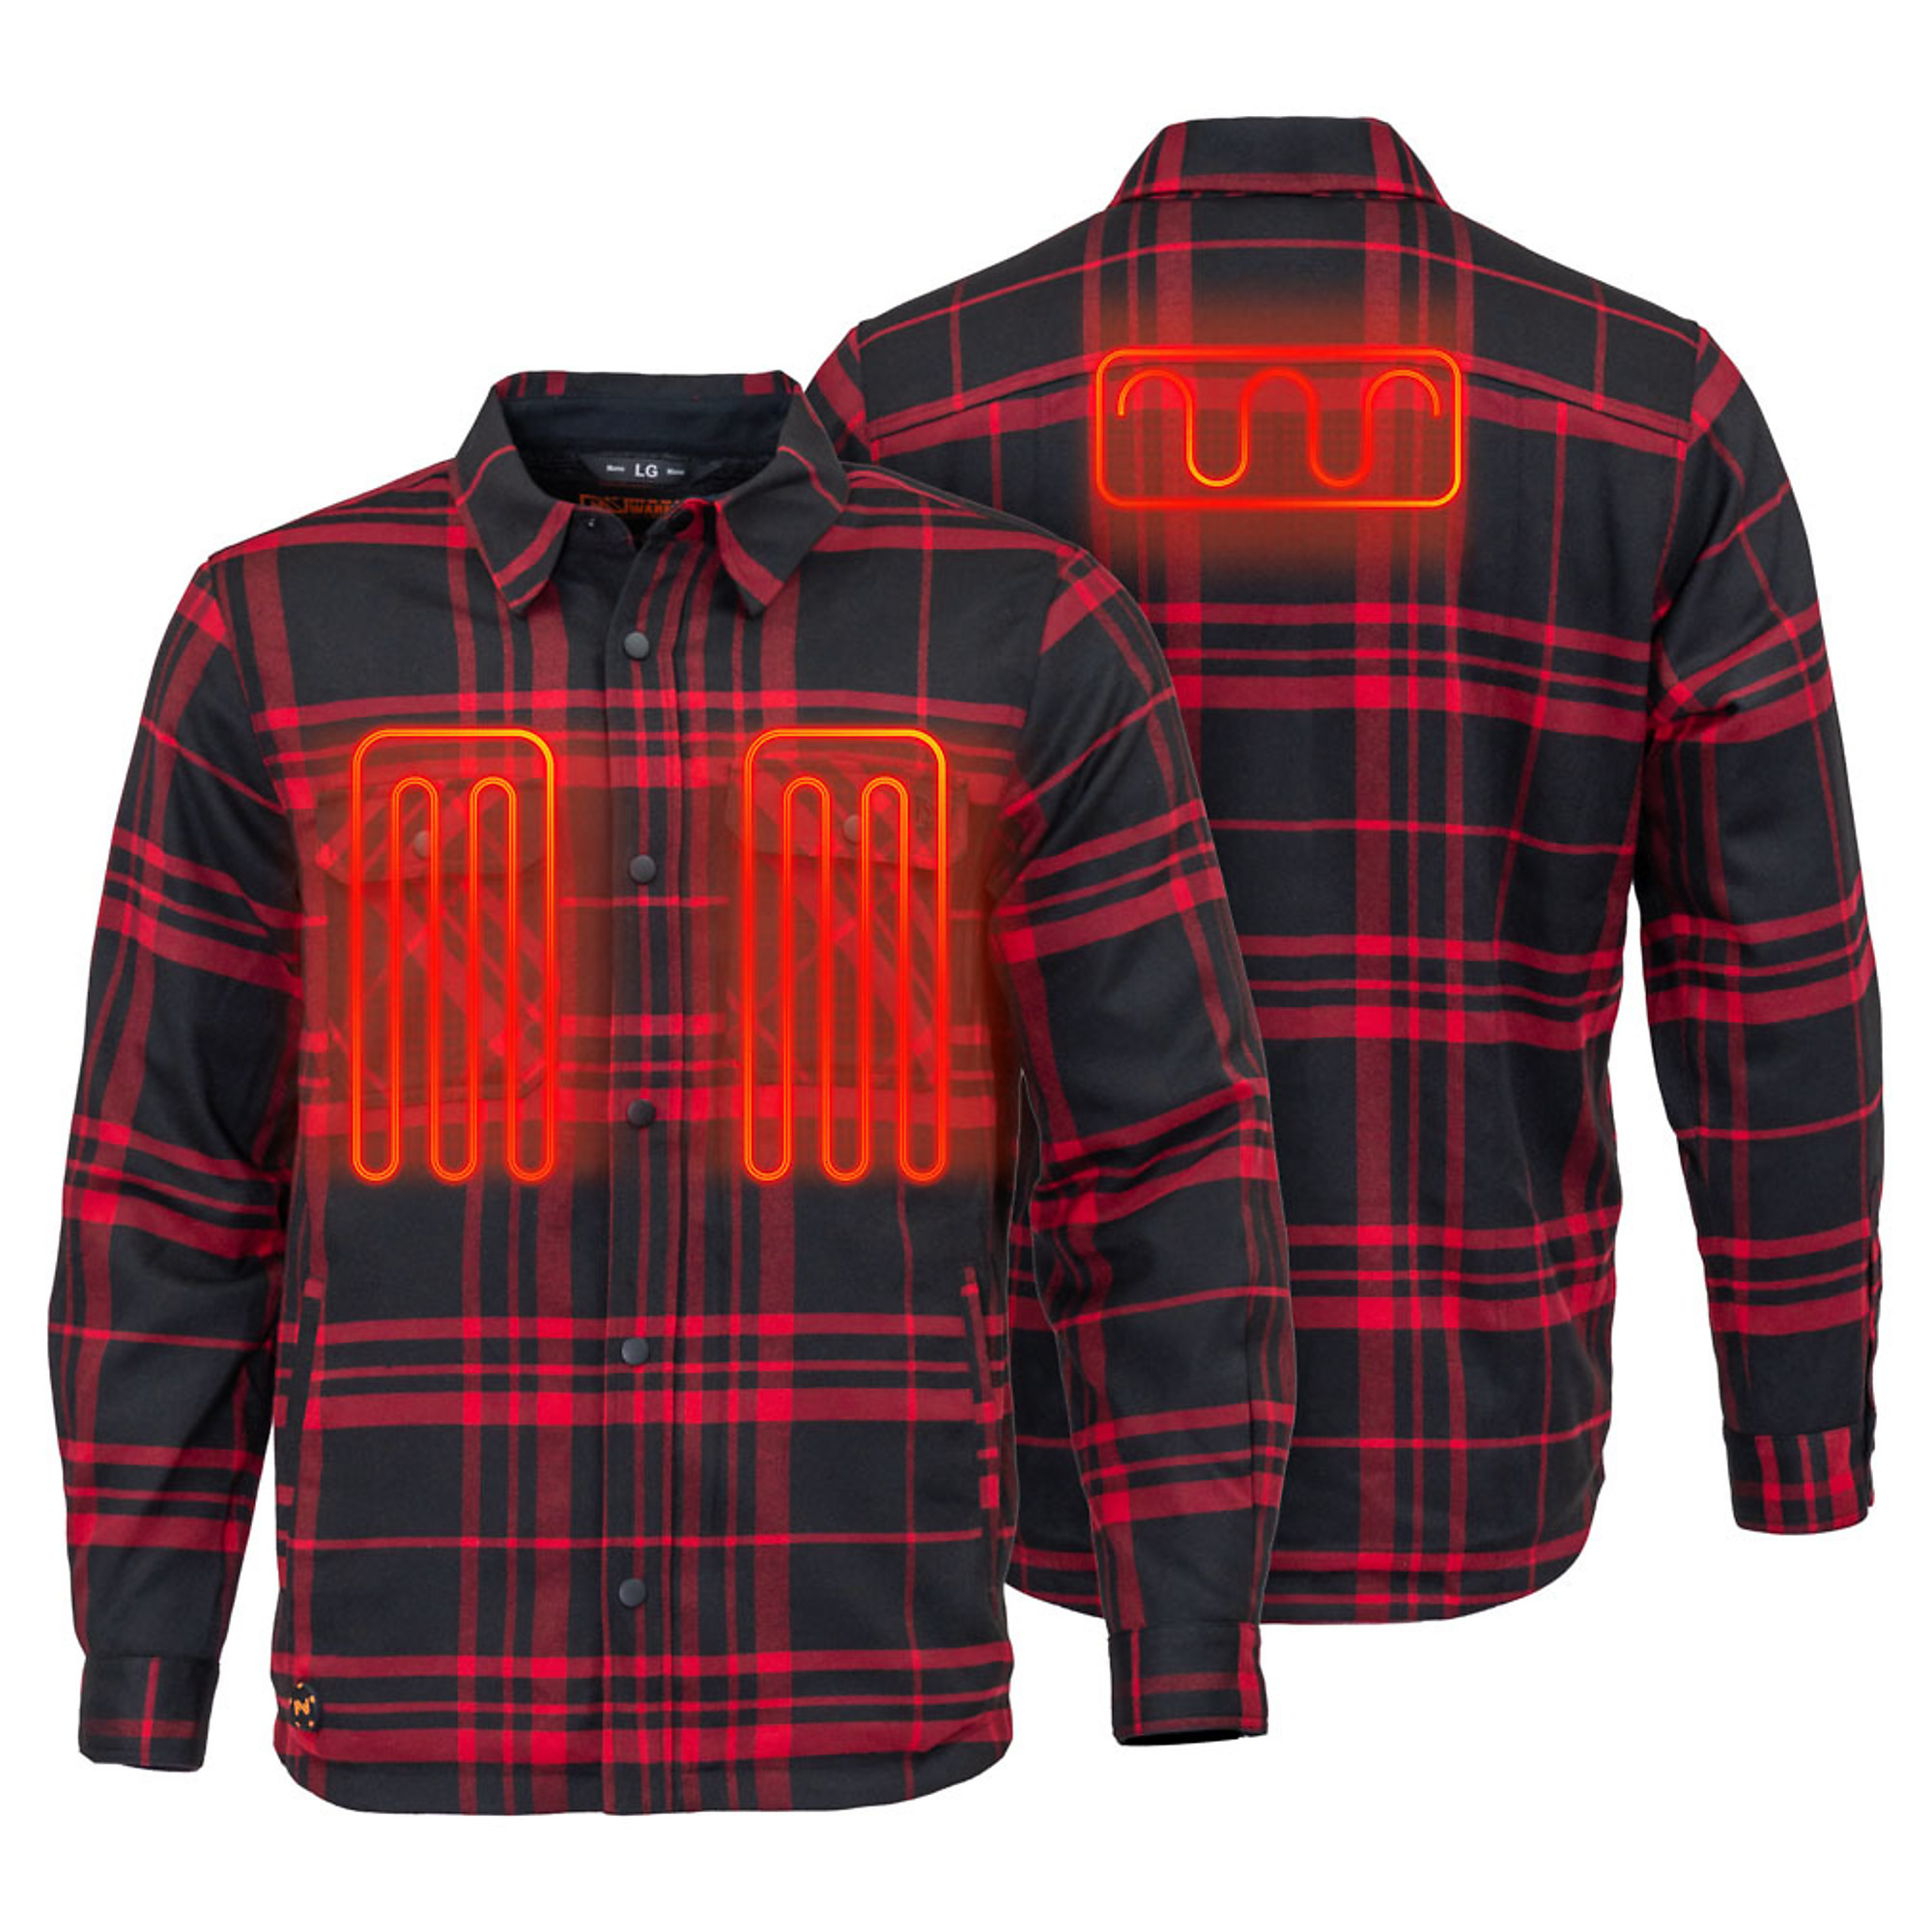 Fieldsheer, Men's Flannel Heated Jacket with 7.4v Battery, Size XL, Color Black / Red, Model MWMJ53010523